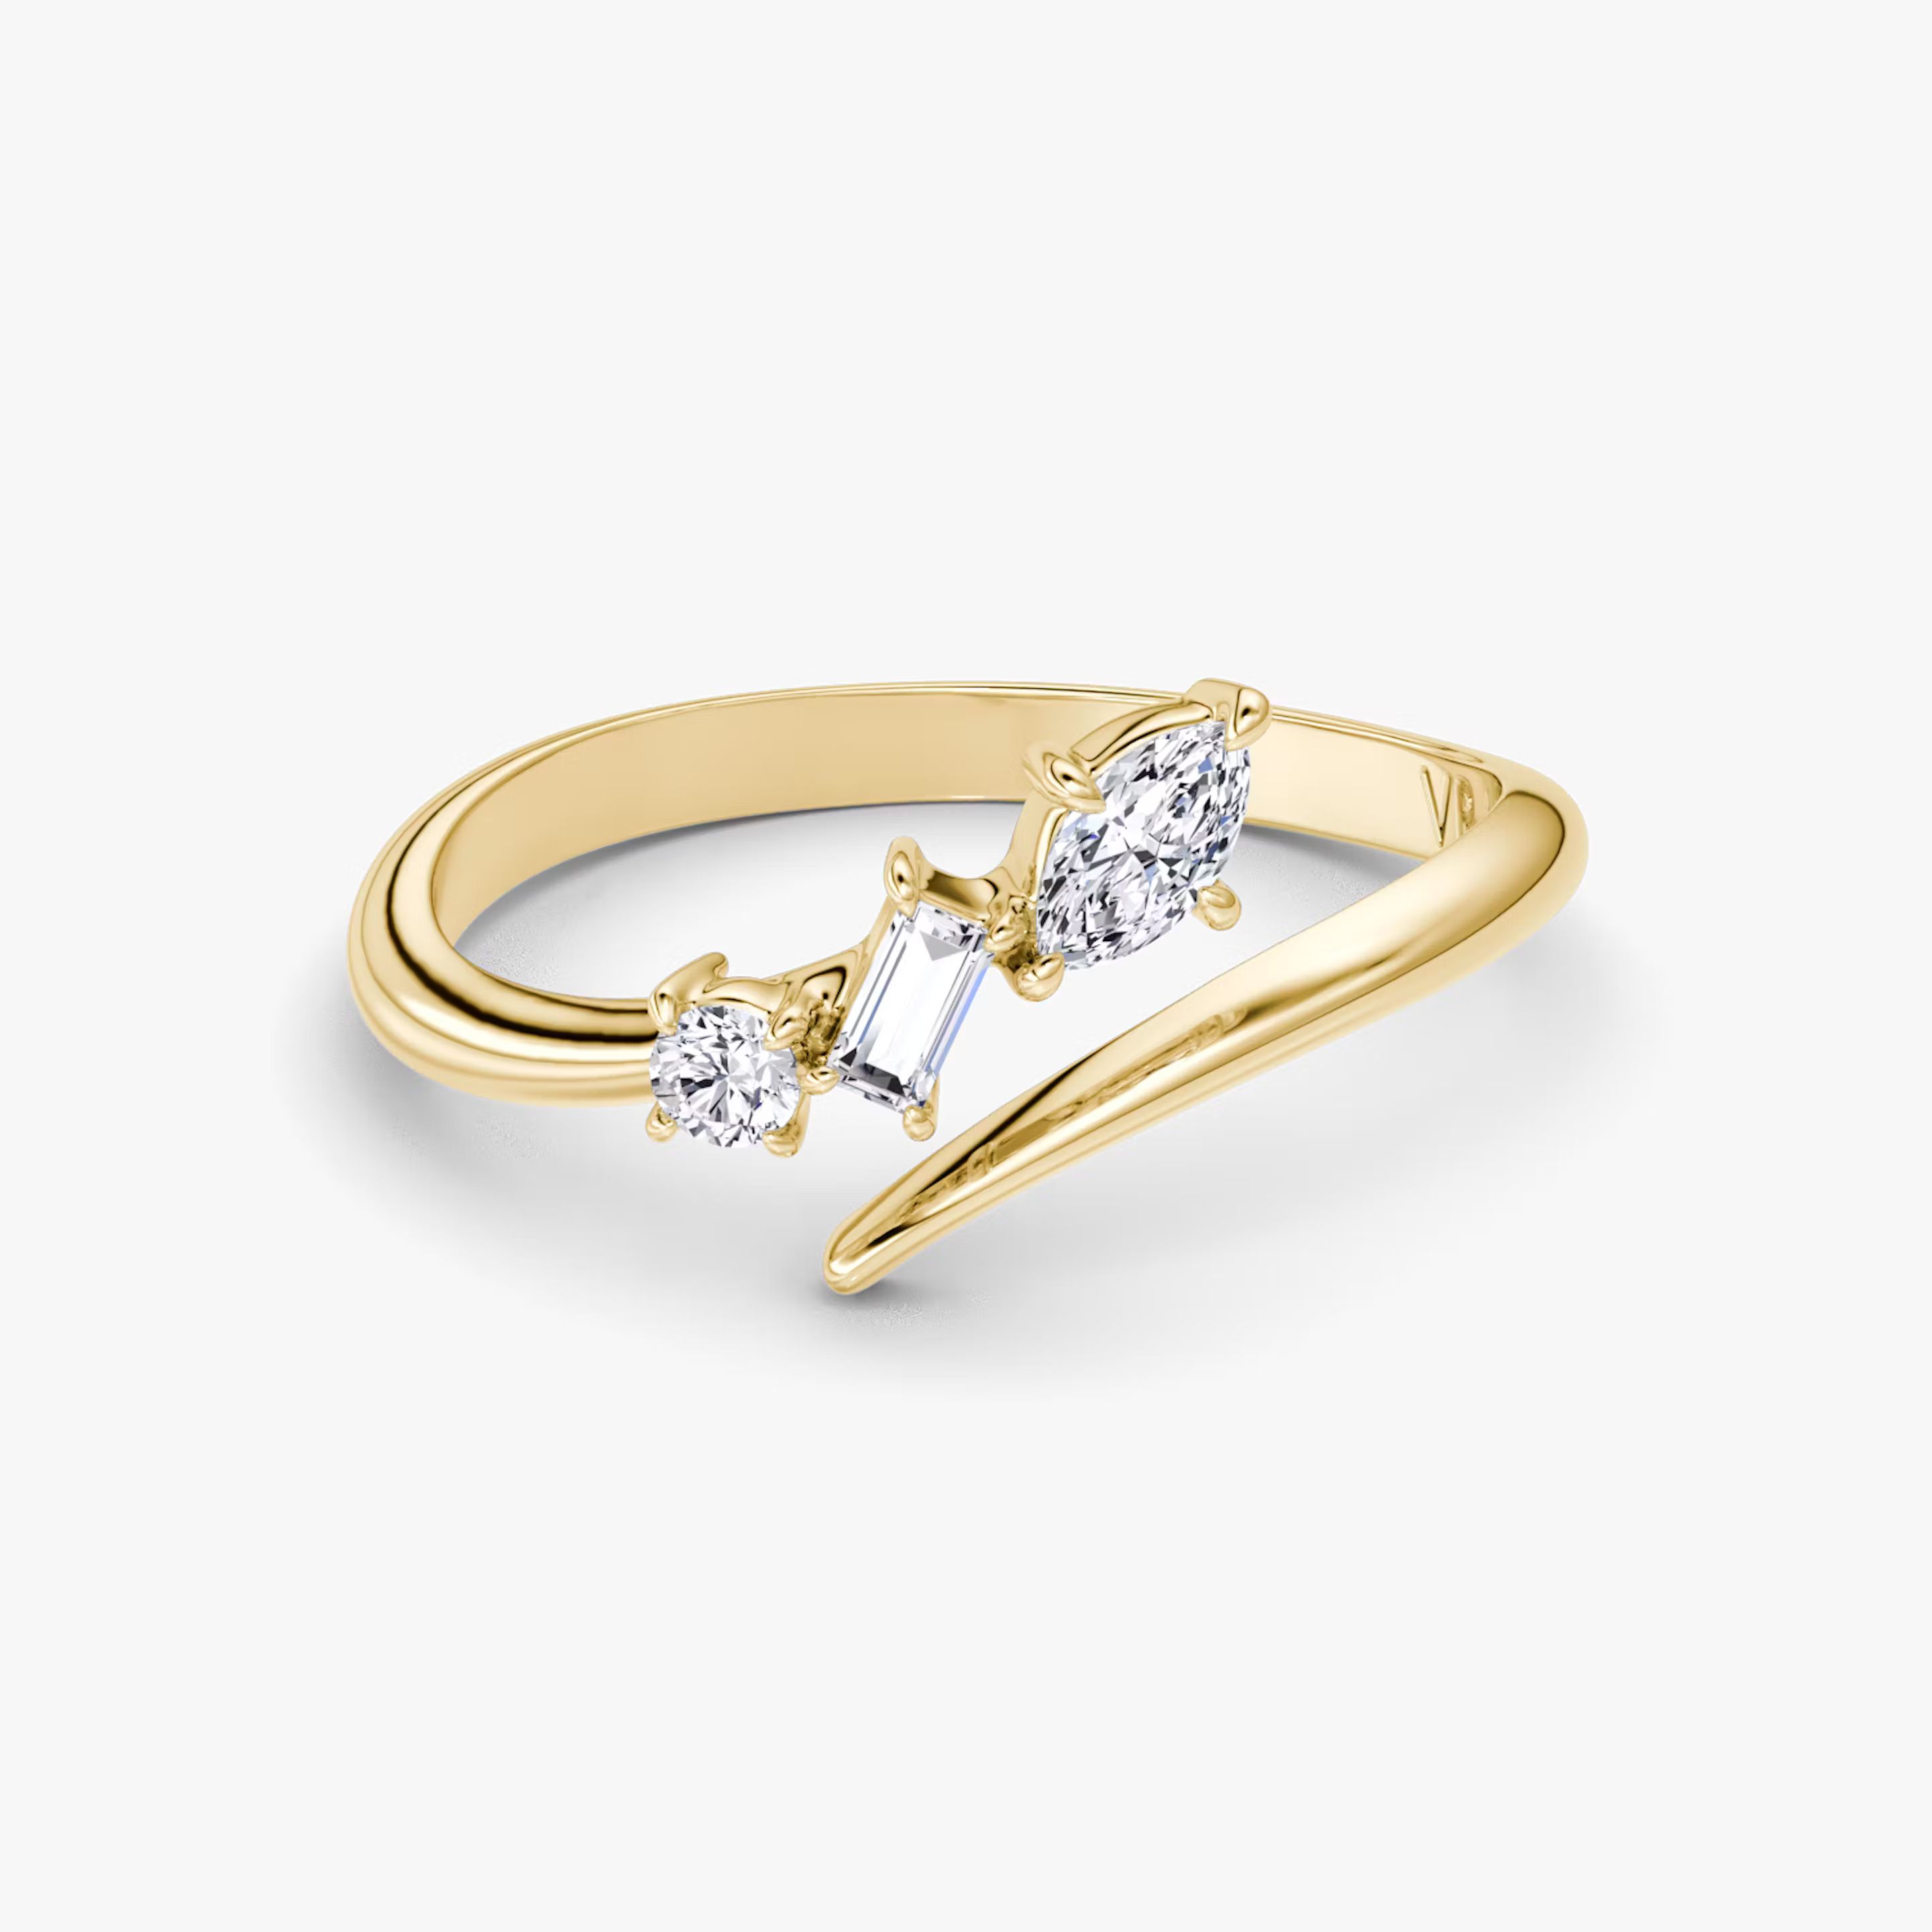 Orion Ring | Vrai and Oro